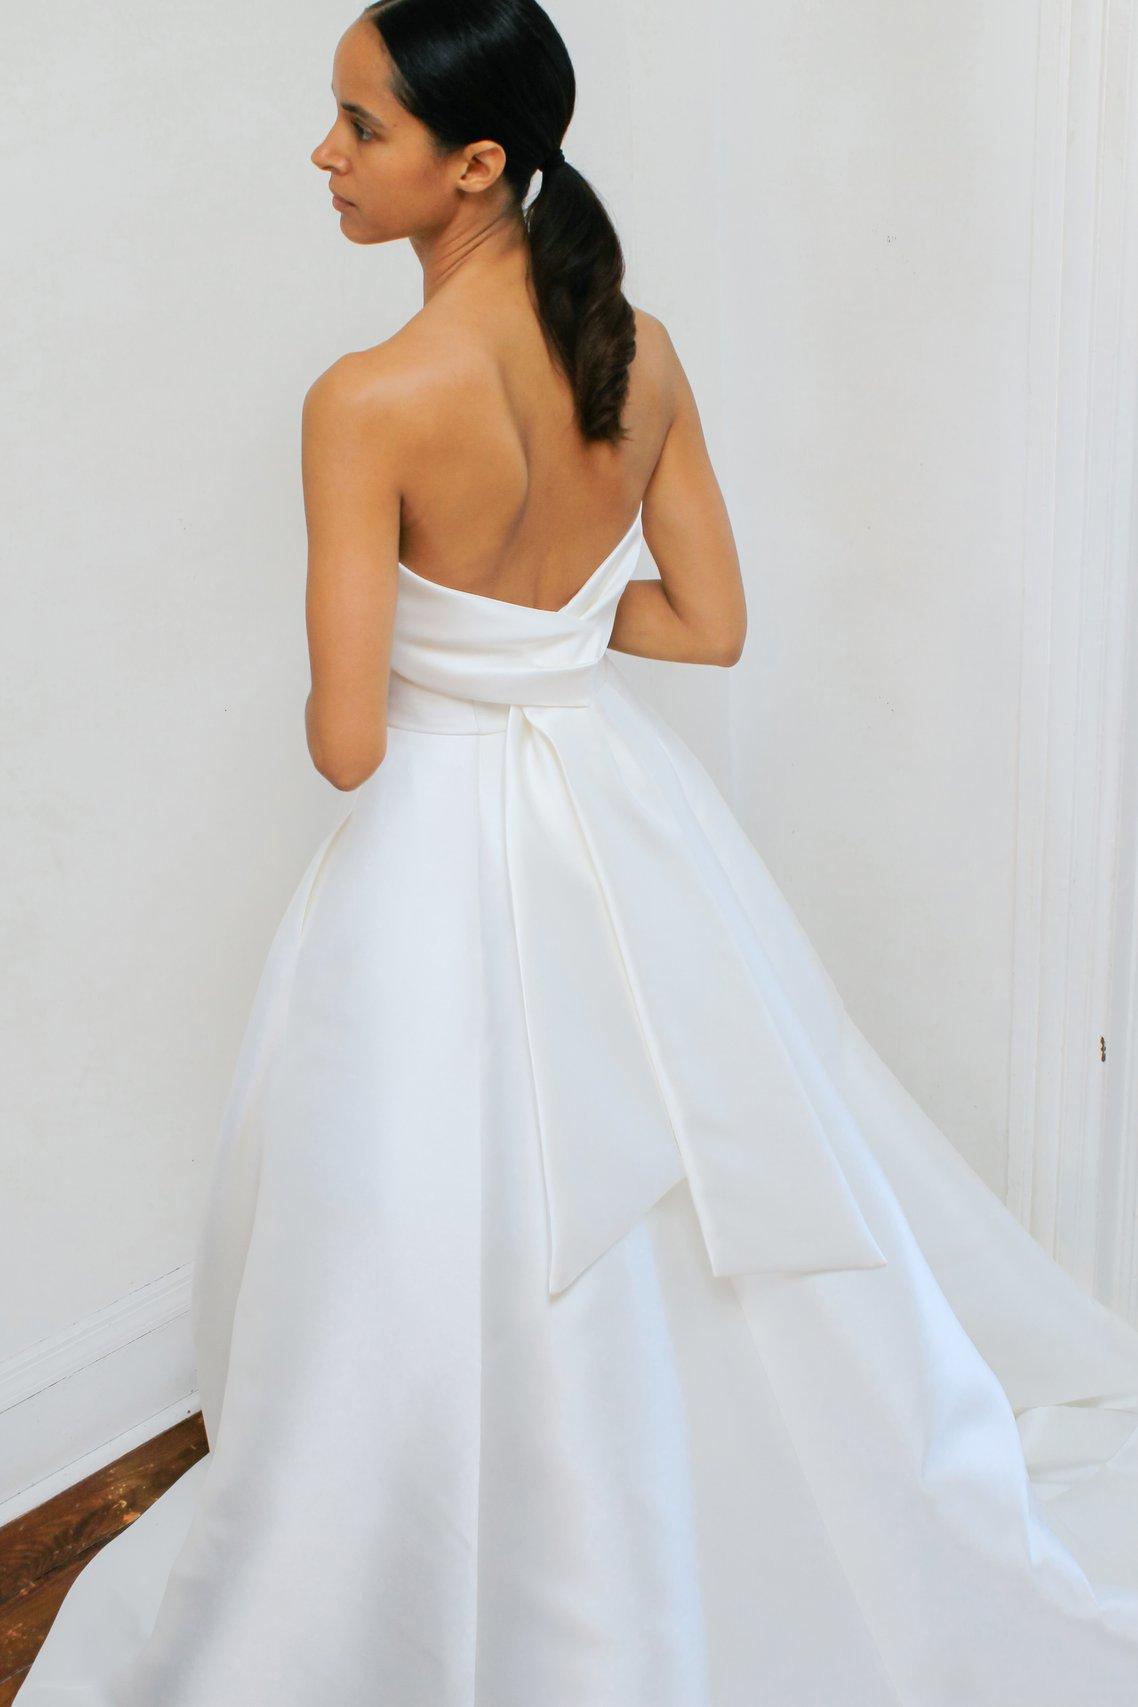 Bridal Gowns Springfield Il